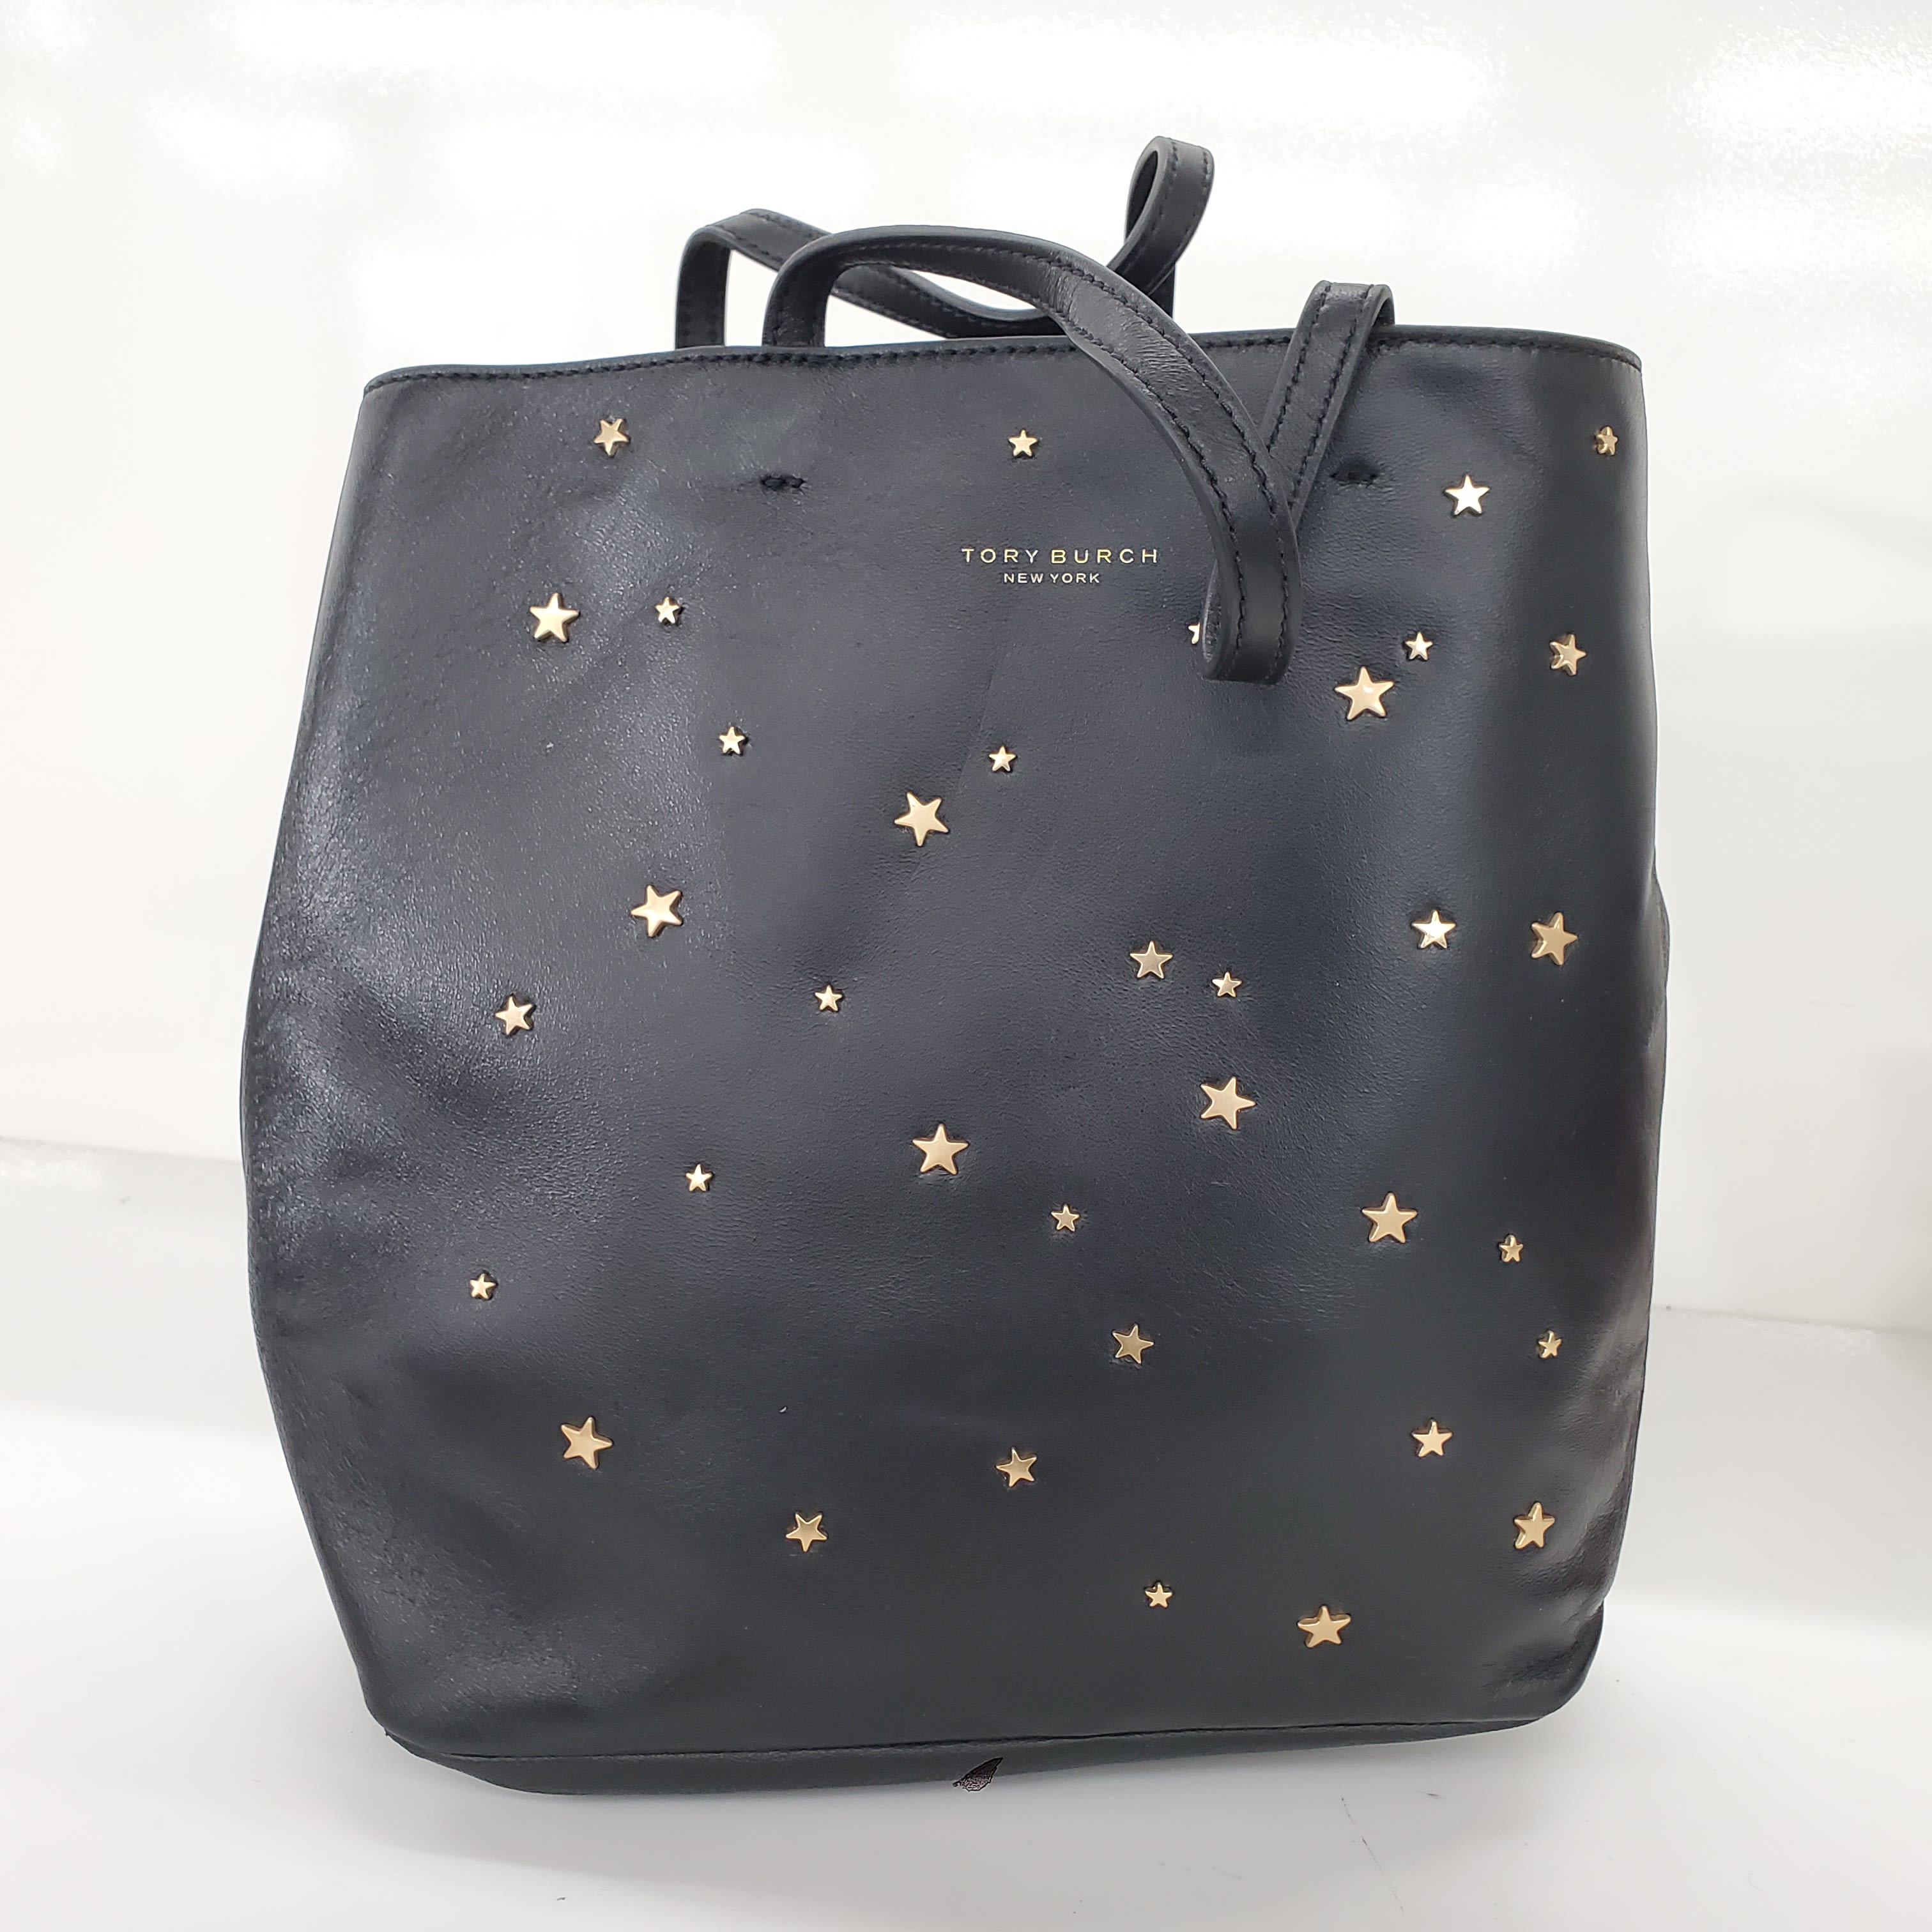 Buy Tory Burch Star Studded Black Leather Tote Bag for USD 199.99 |  GoodwillFinds